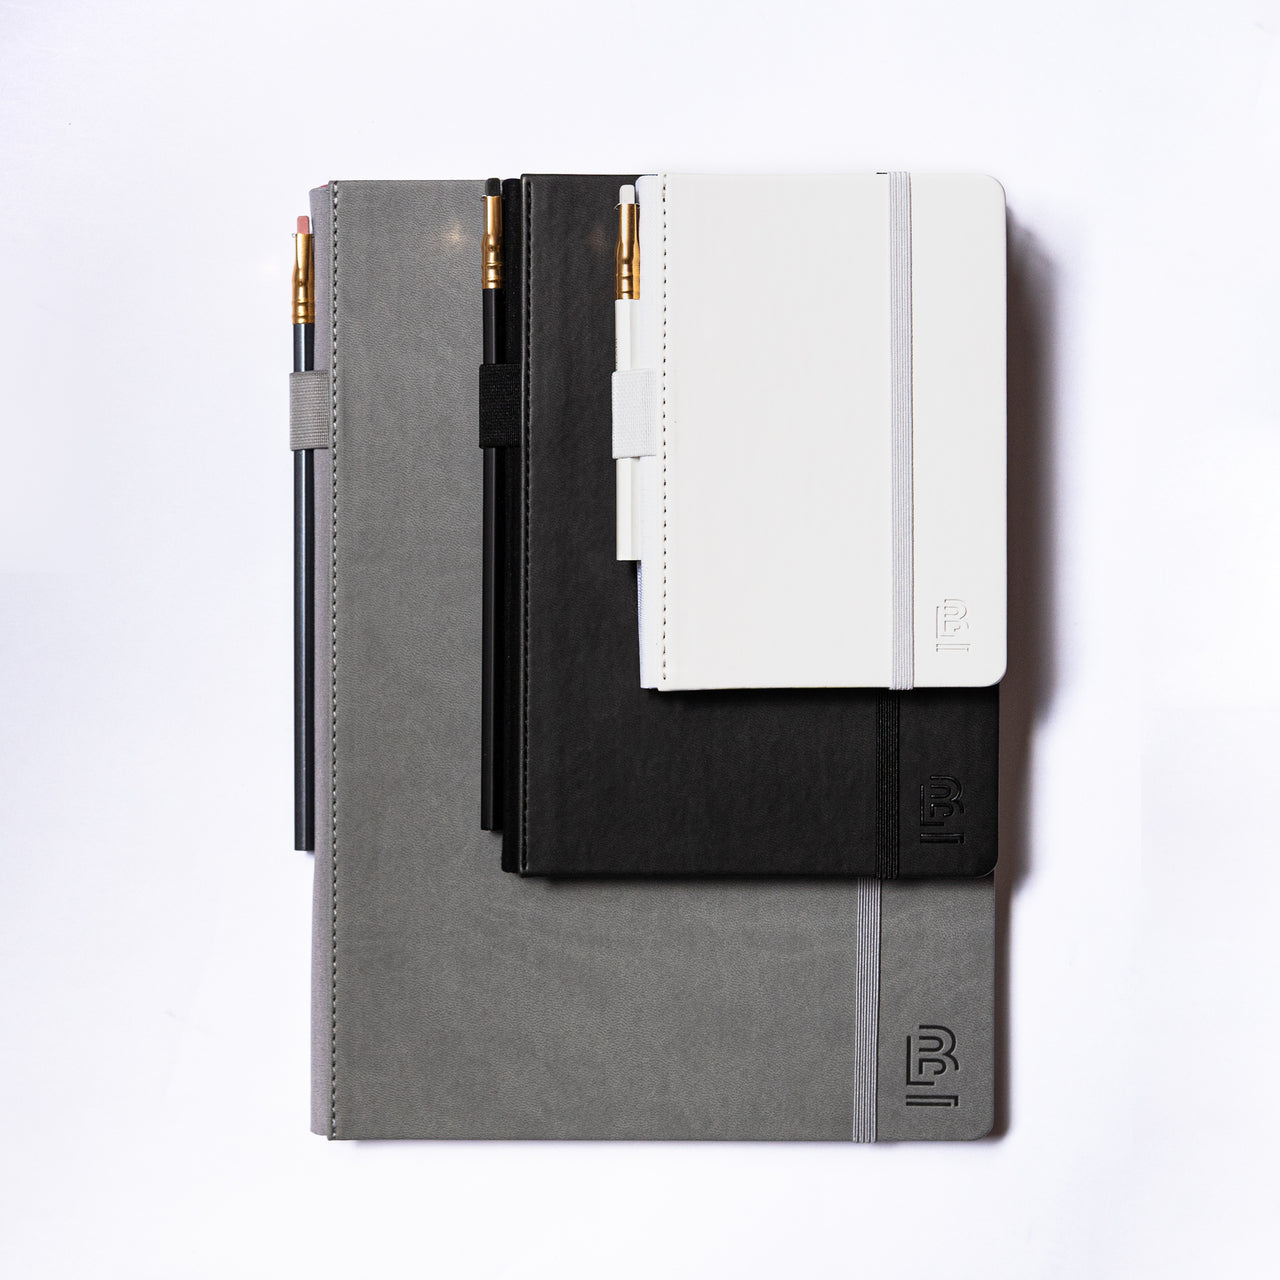 The A4, large size notebook measures 8 1/4  inches wide by 11 3/4 inches high (210x297 mm).

